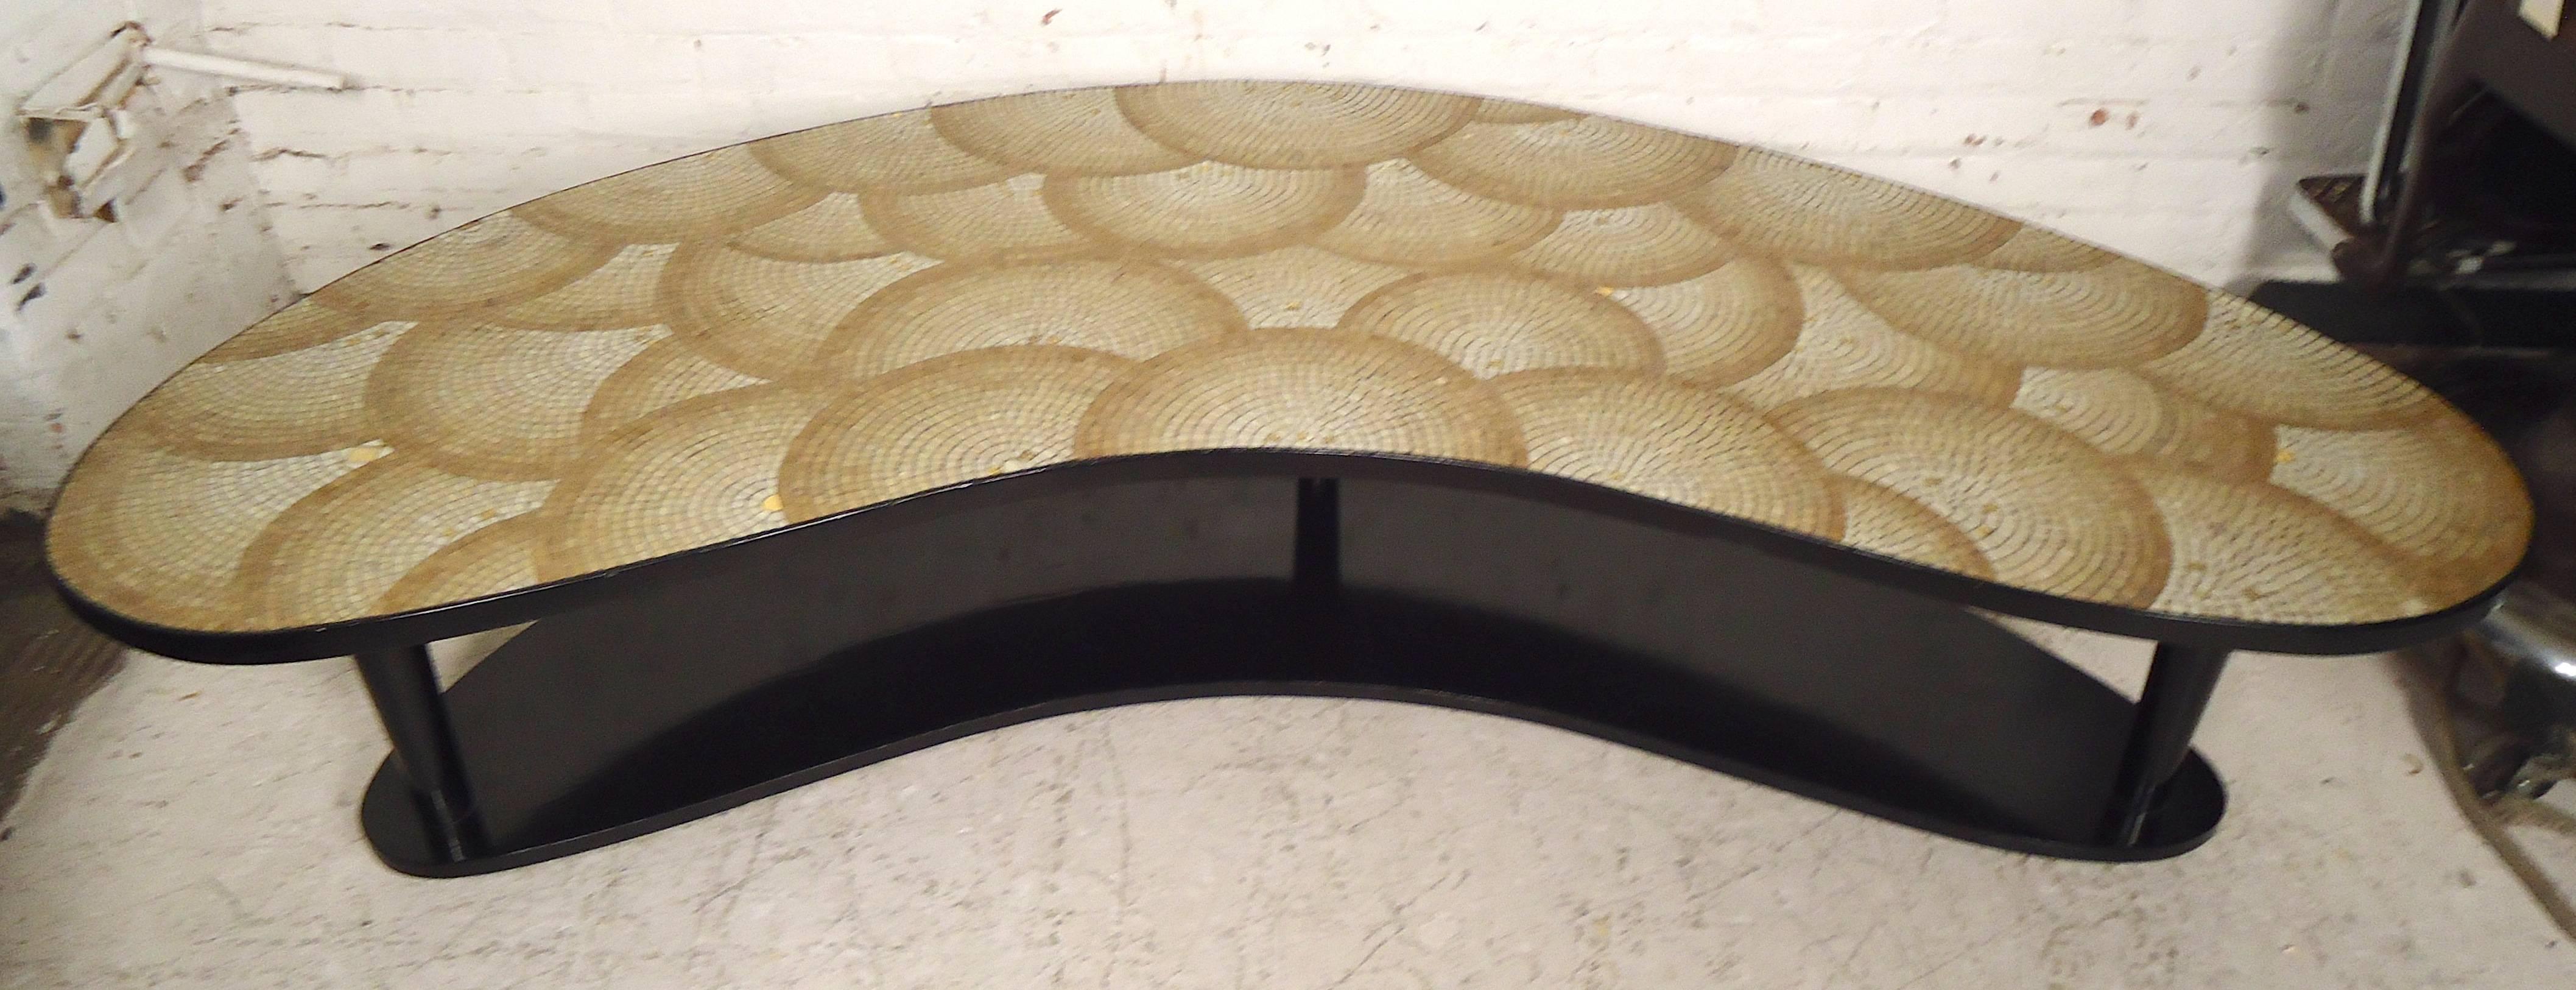 Vintage modern table with kidney shape, tiled with beautiful mosaic pattern. Great shape and design.

(Please confirm item location - NY or NJ - with dealer).
 